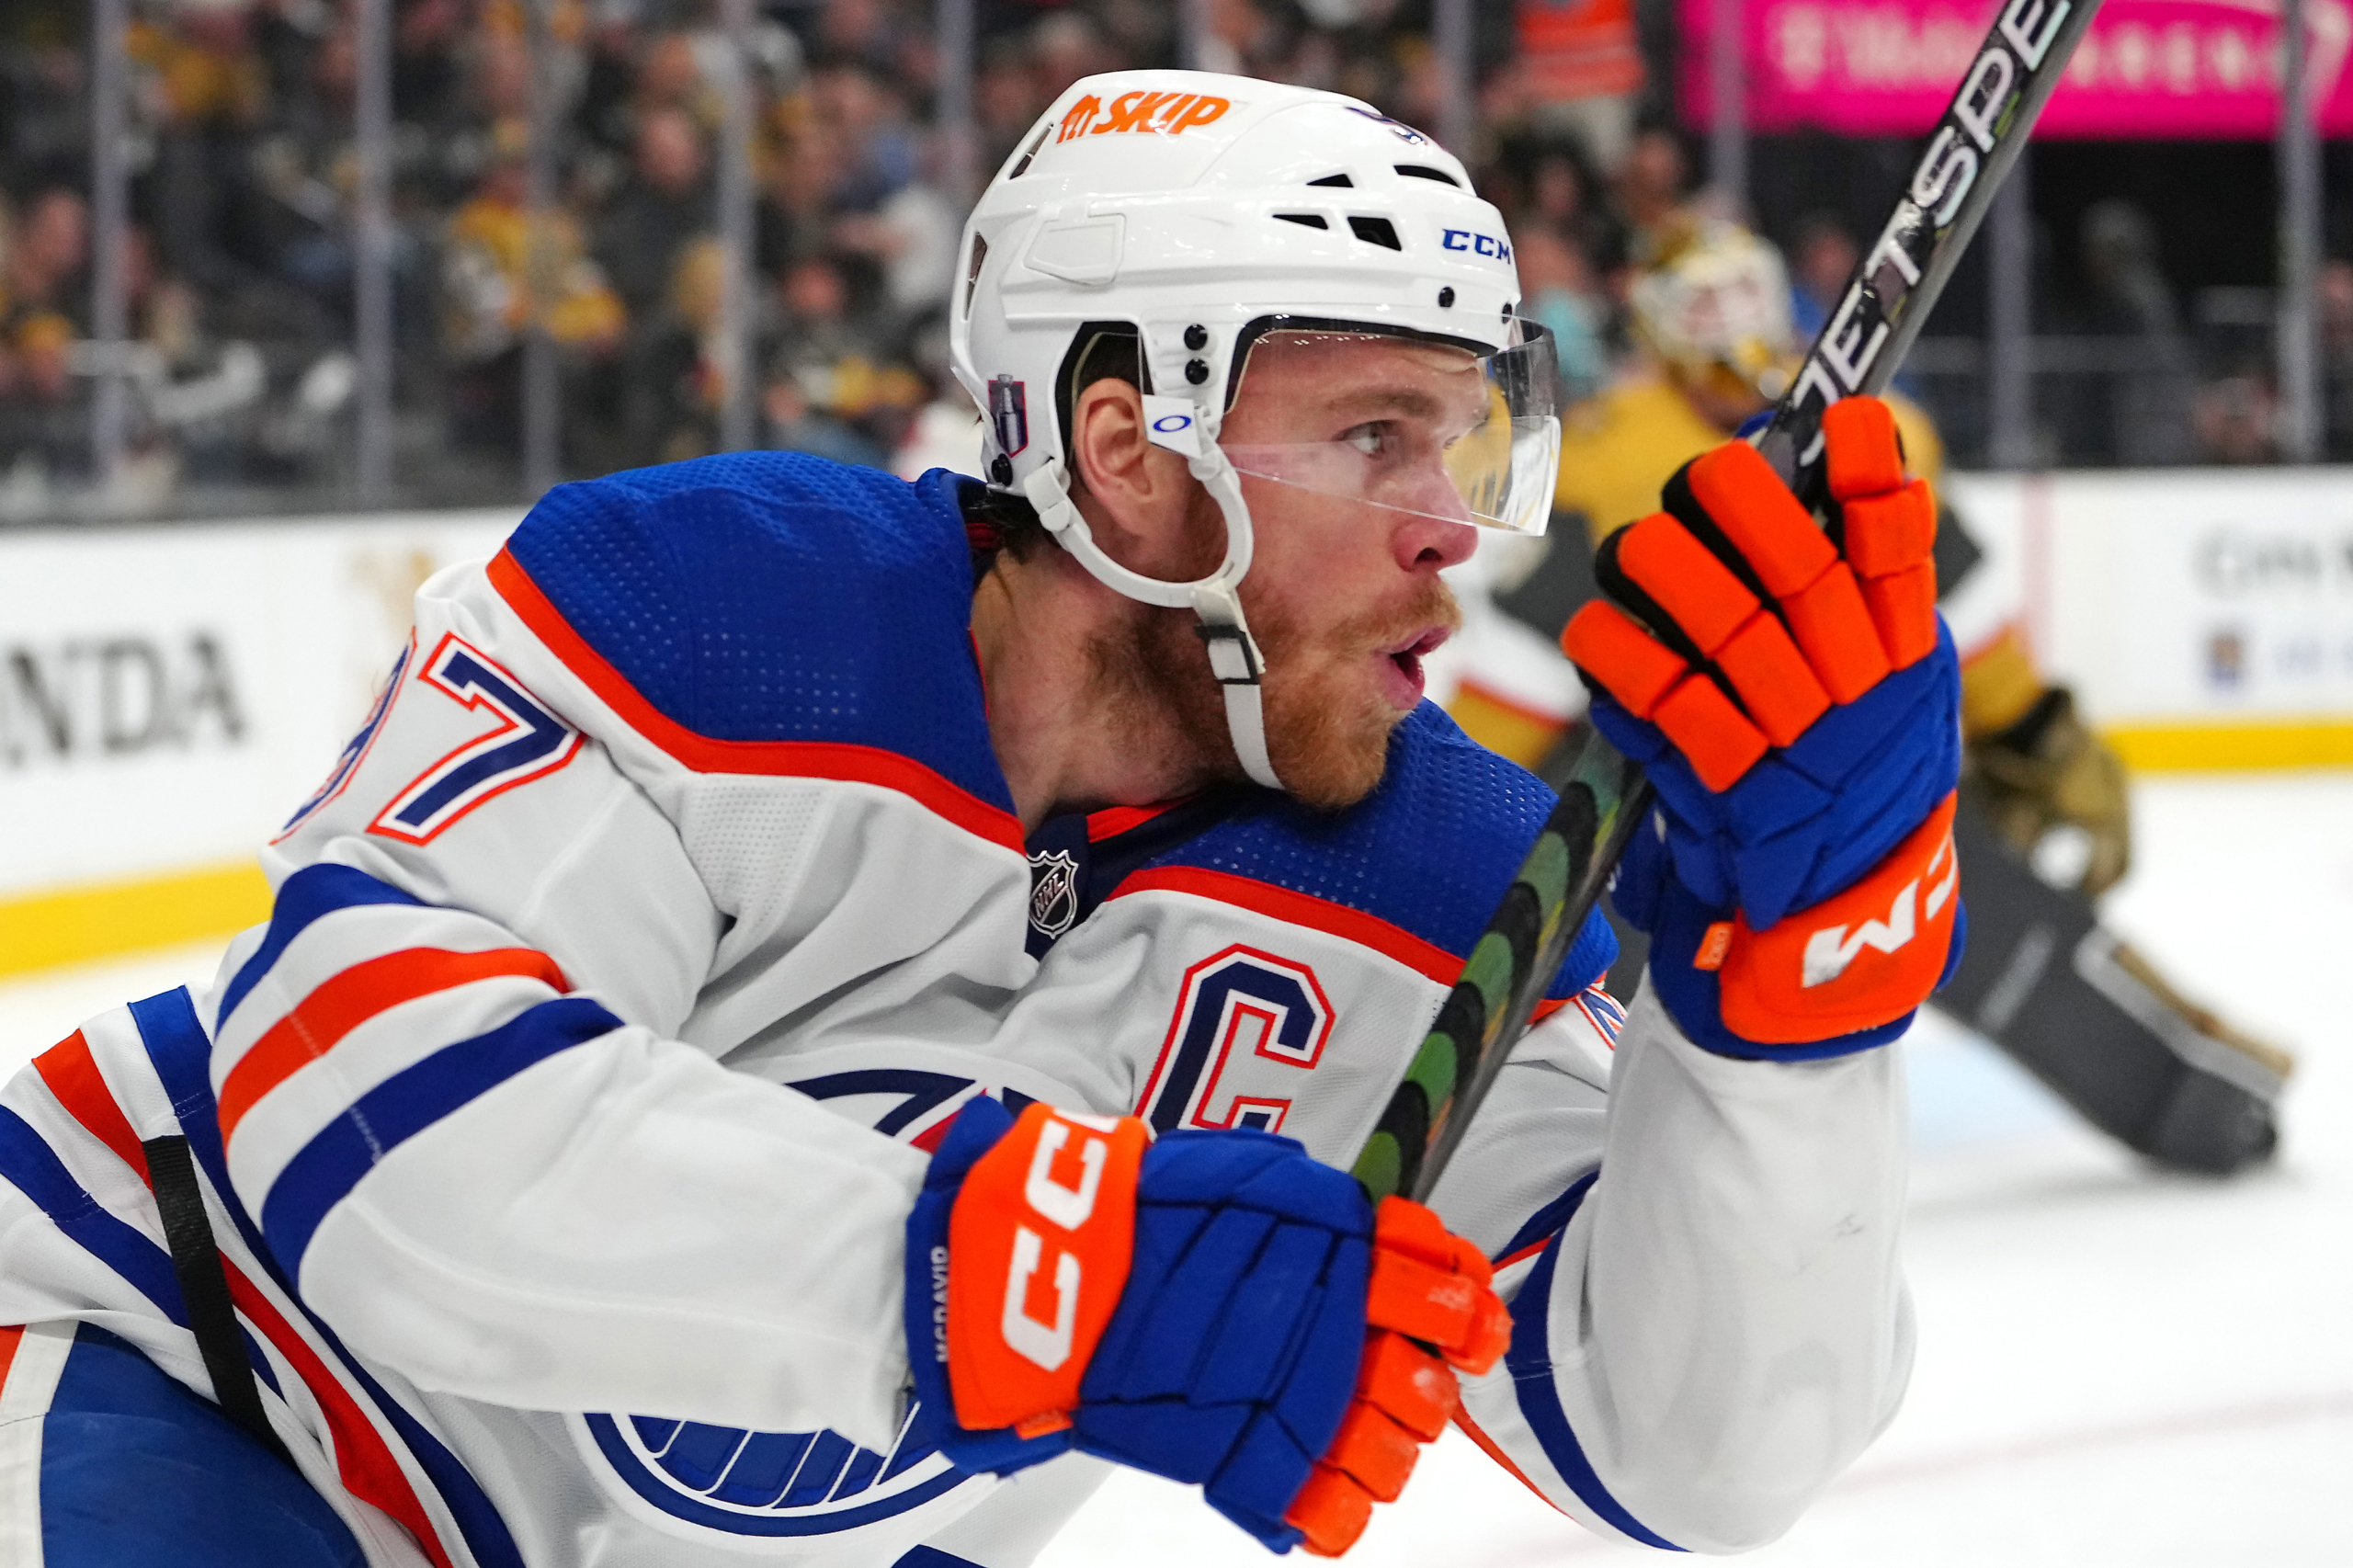 NHL's highest-paid players: Connor McDavid tops Artemi Panarin in 2022